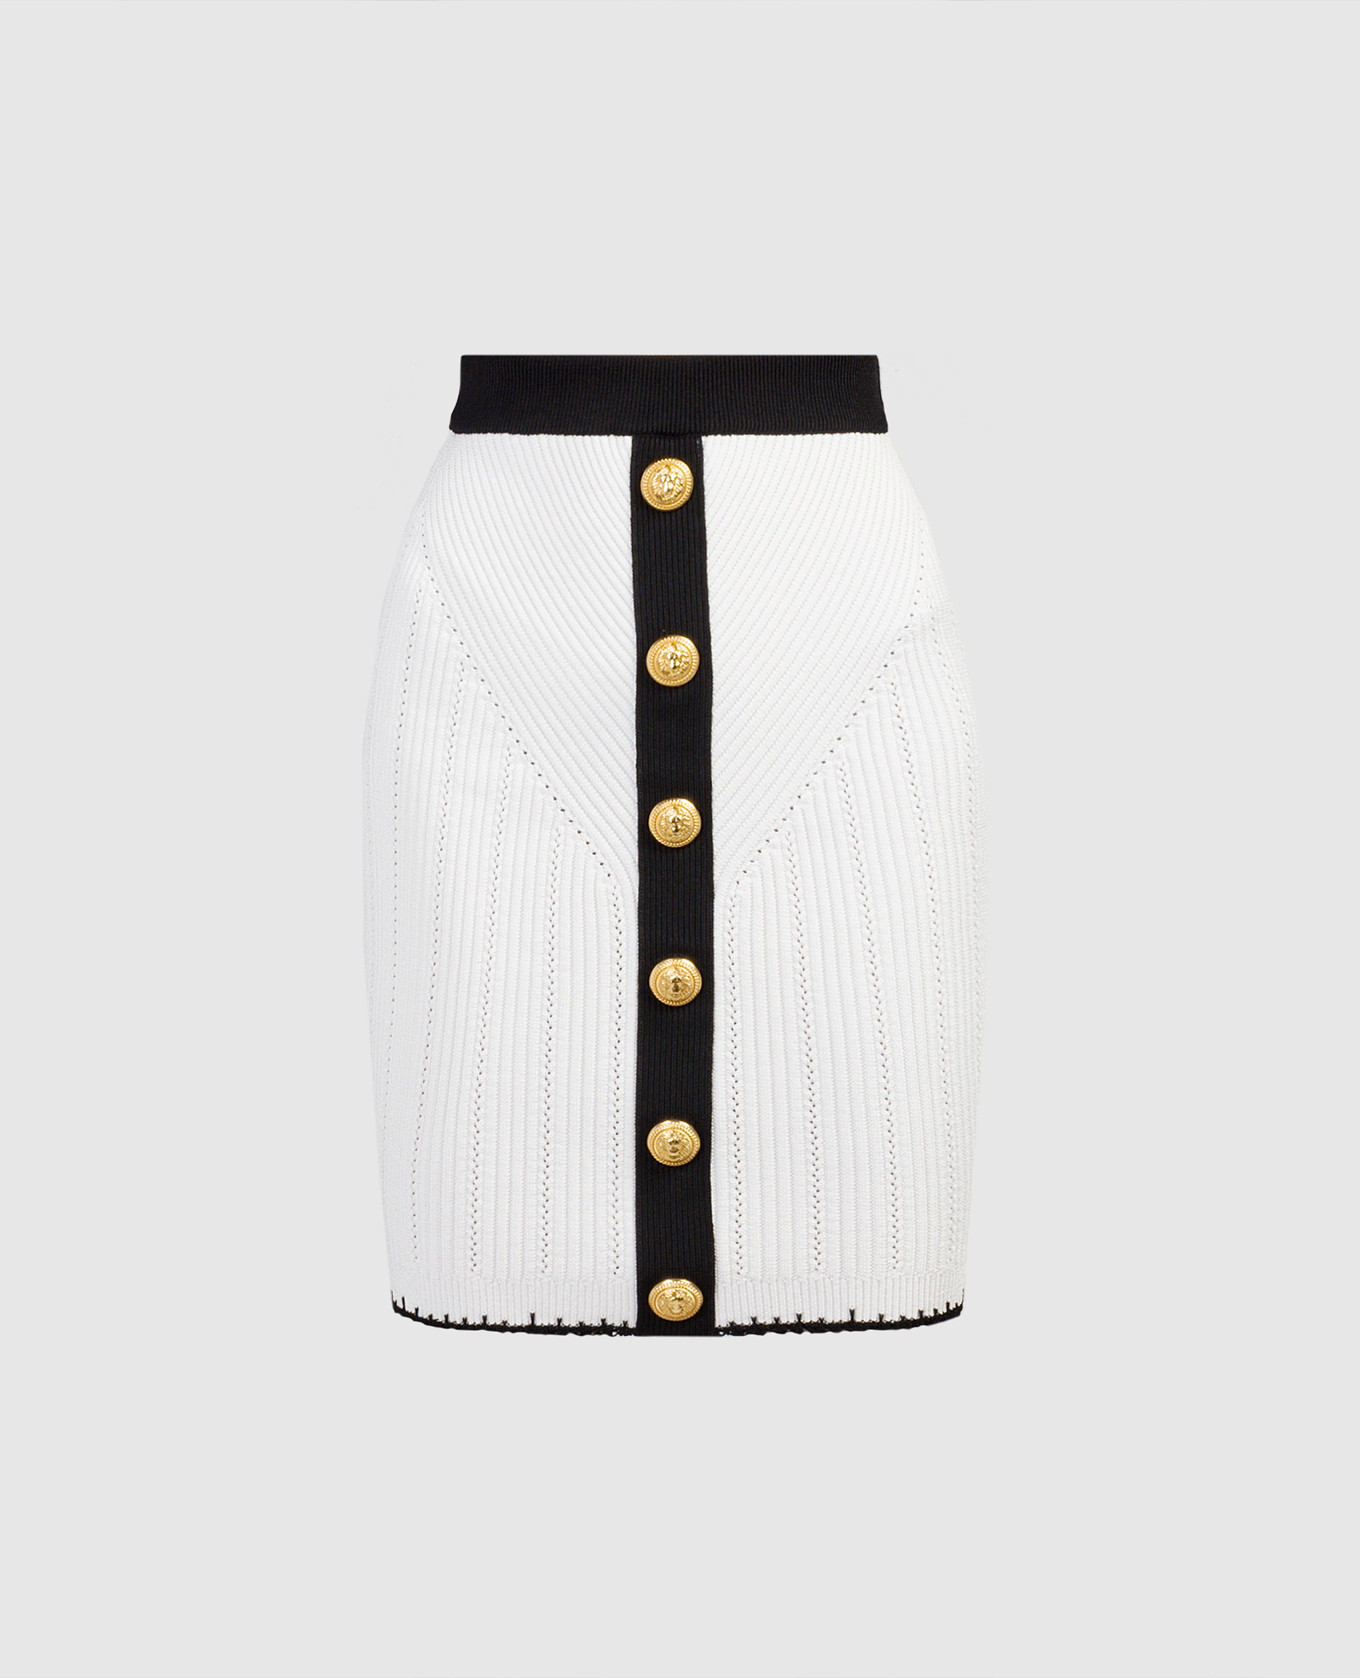 White skirt in a textured pattern